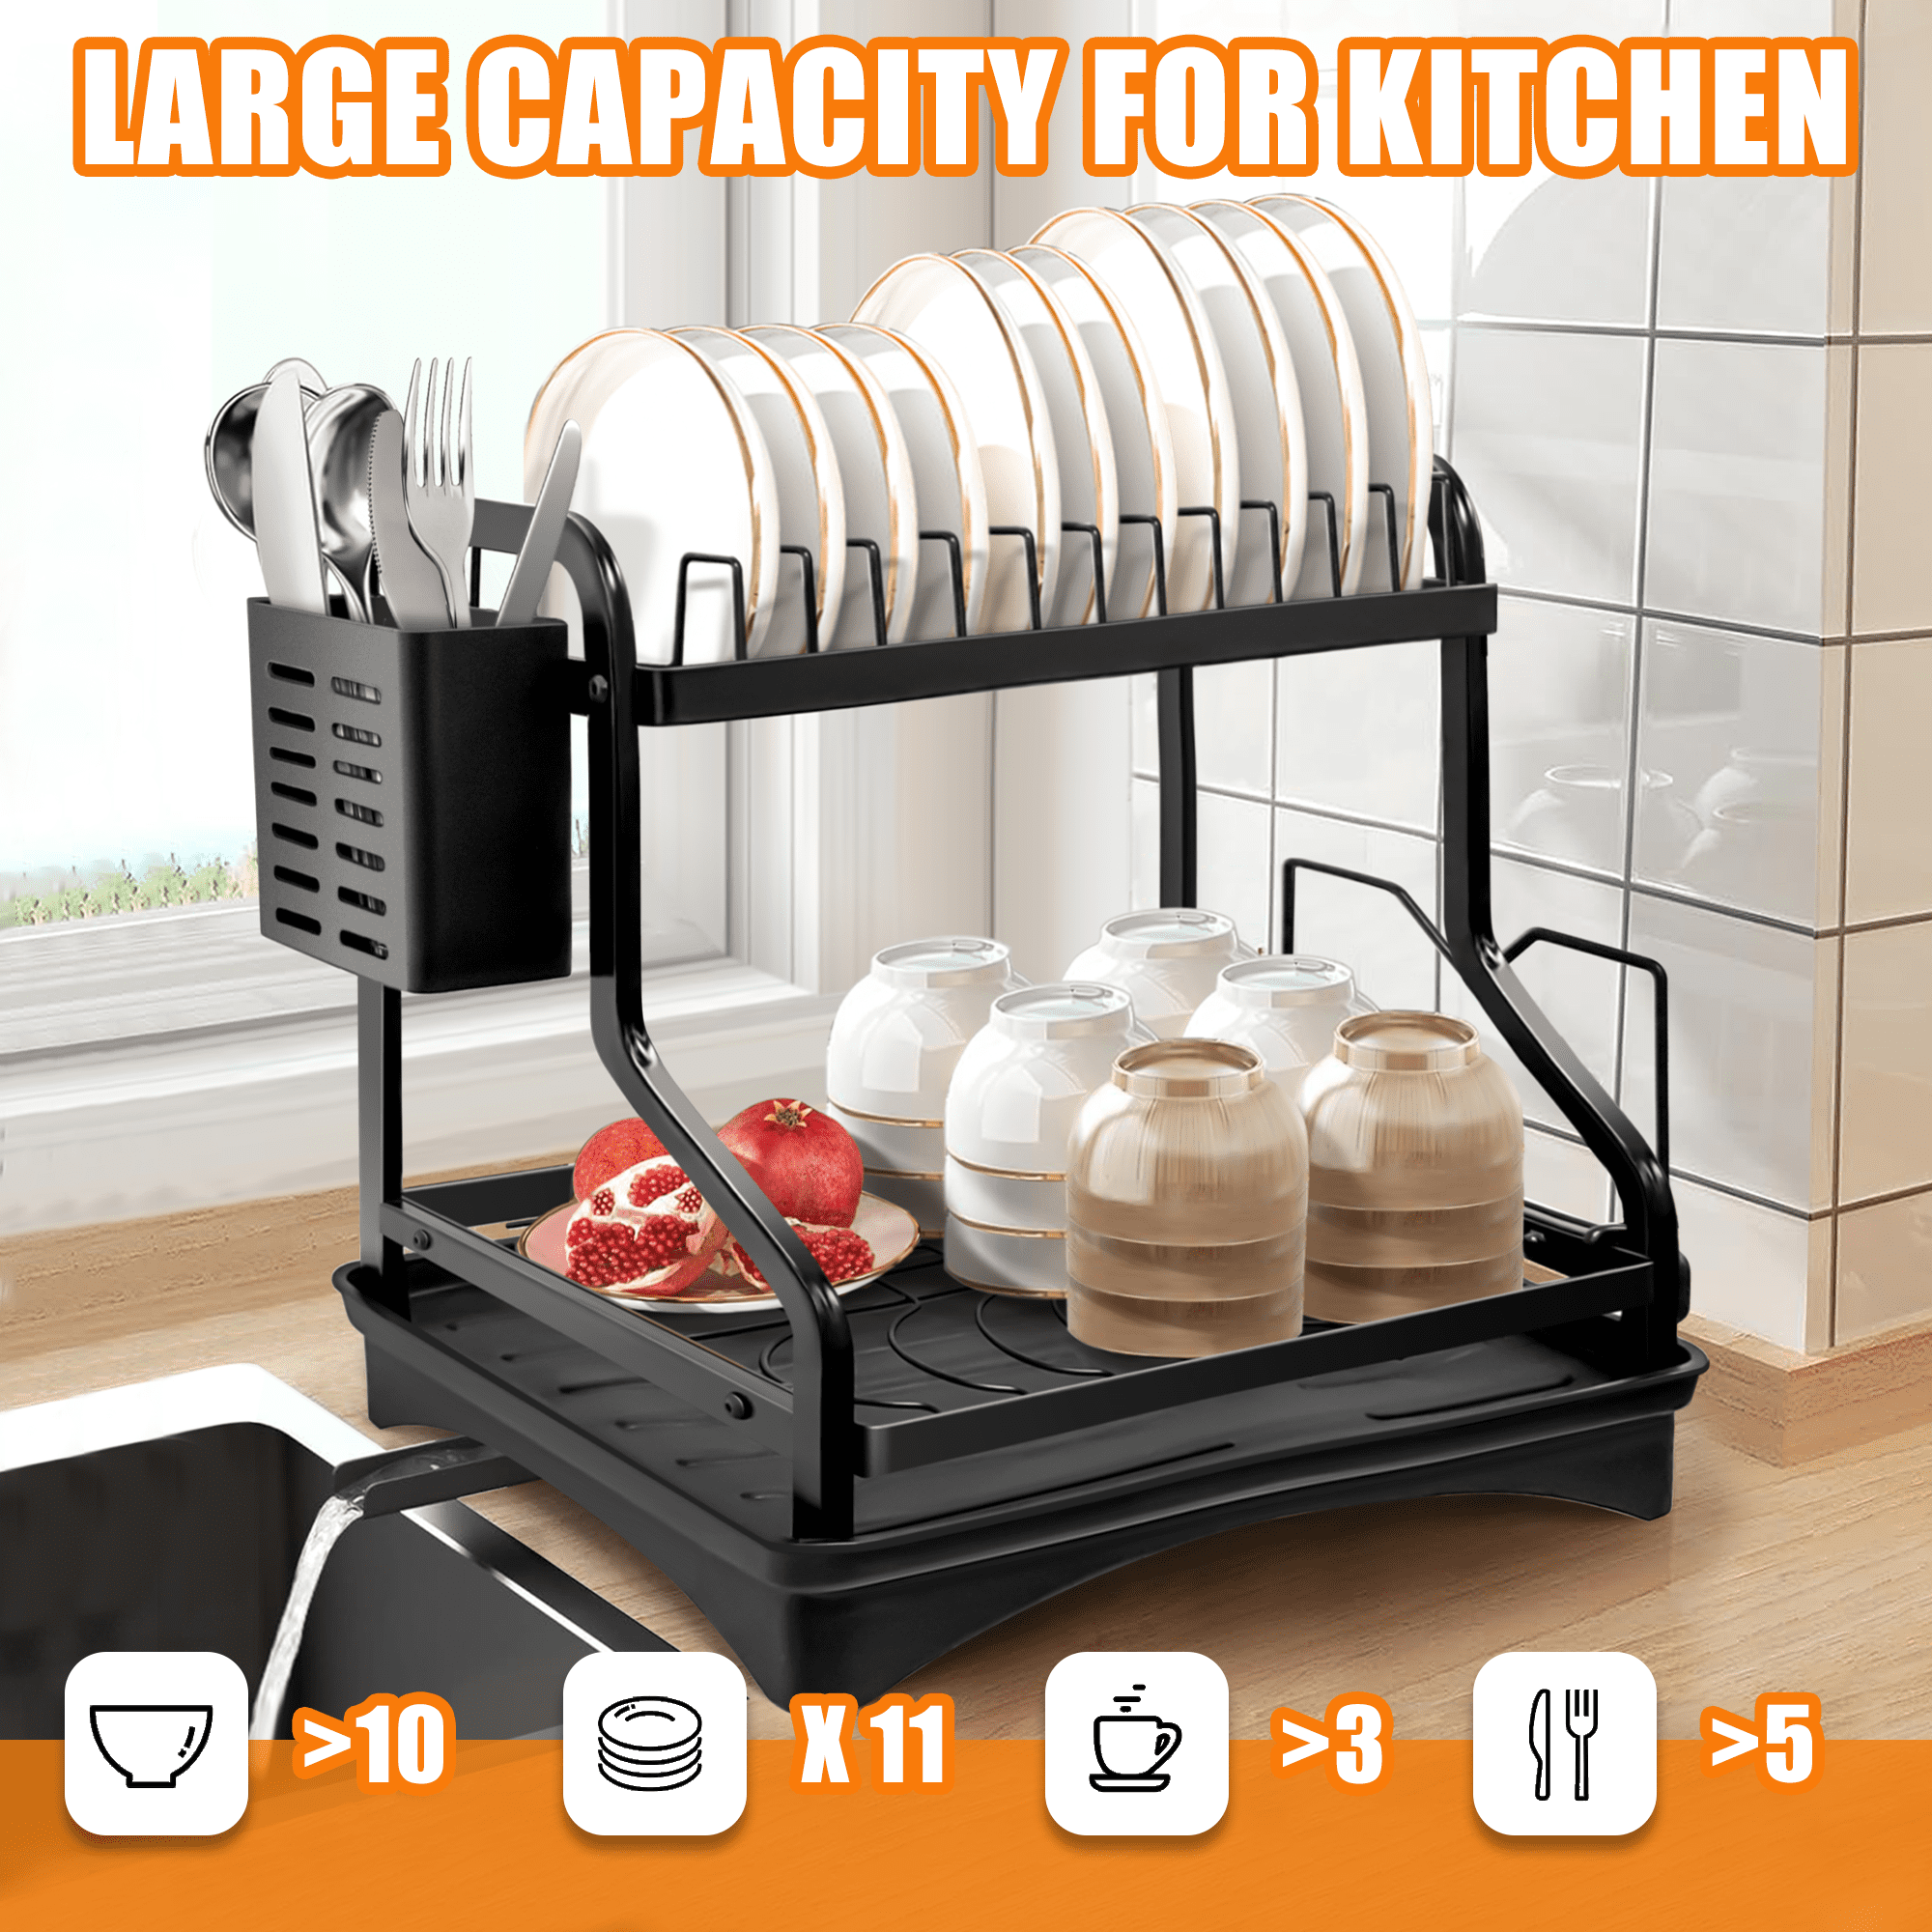 Riousery 2-Tier Dish Rack for Kitchen, Dish Drying Rack with Drain Board  Tray, Compact Dishing Rack with Utensil Holder, Cutting Board Holder,  Kitchen Dishes Storage and Organizers 